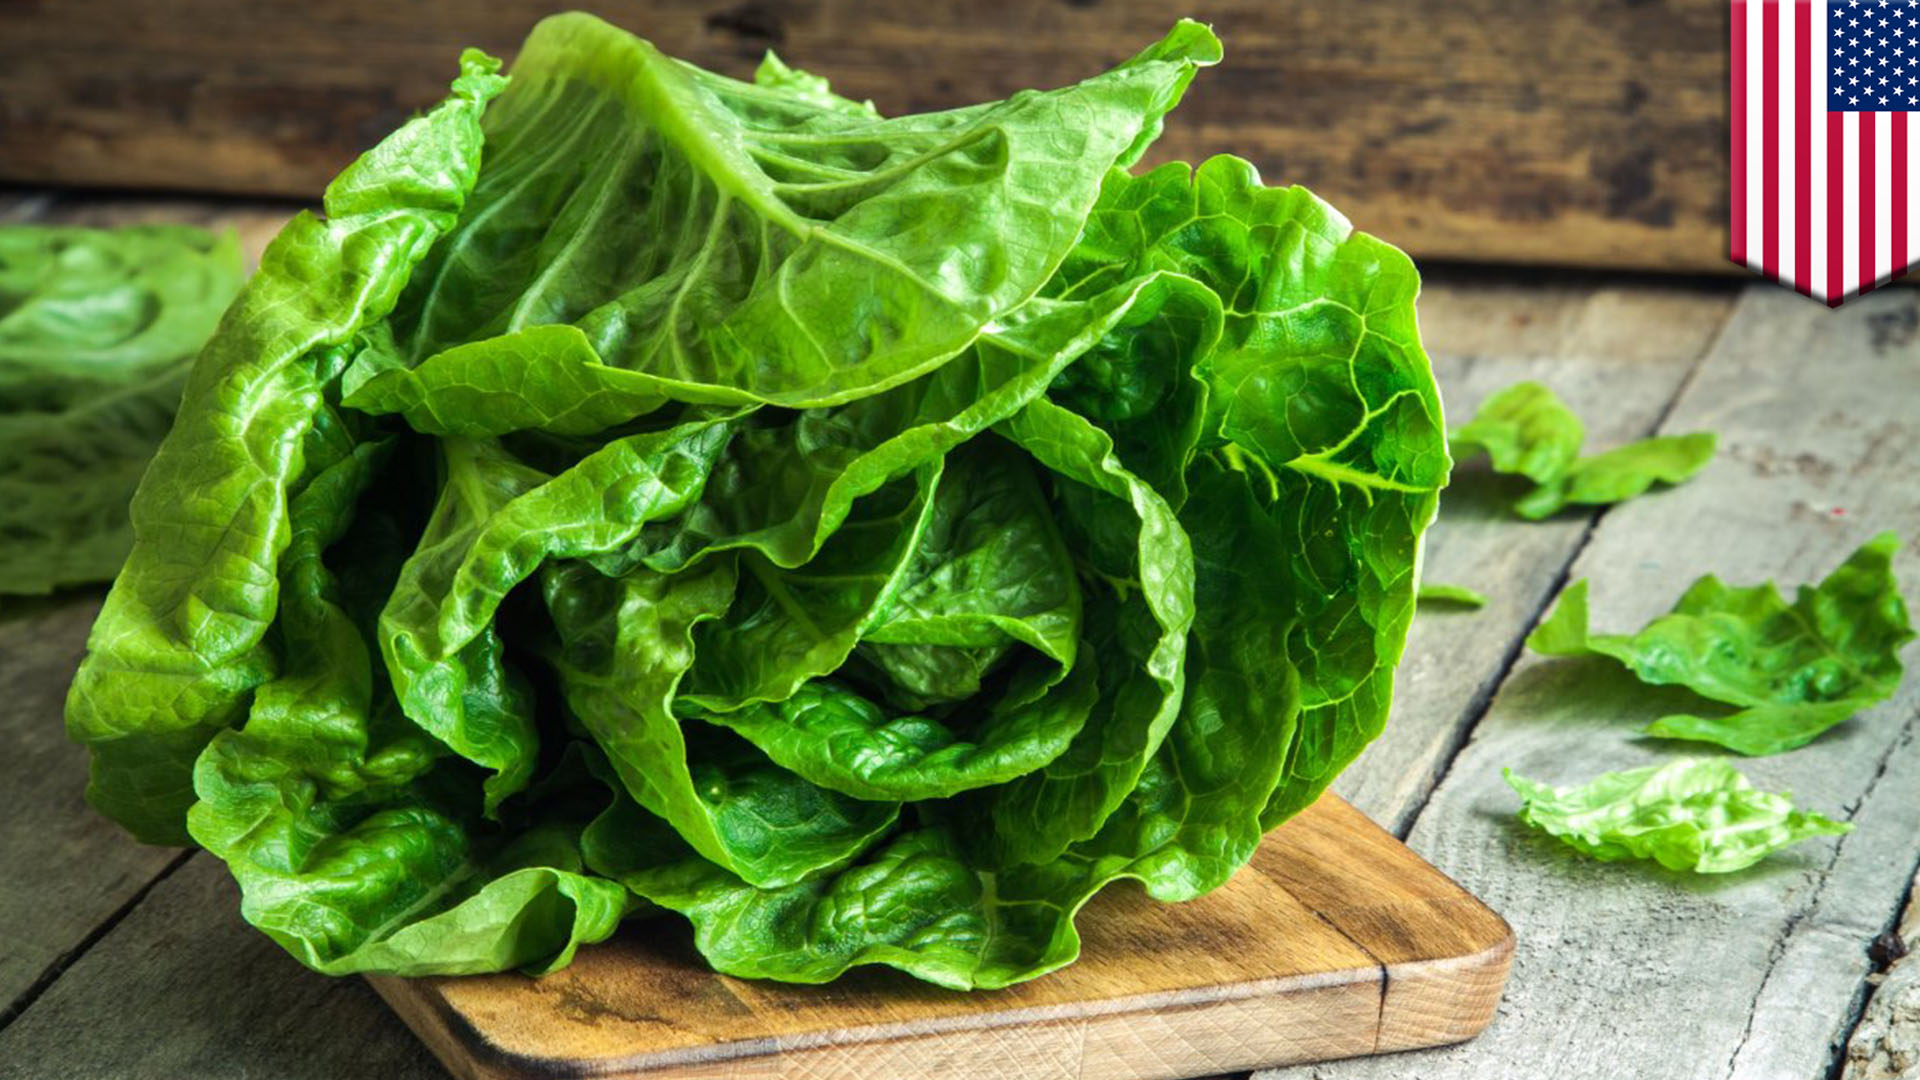 E. coli outbreak infections associated with romaine lettuce from Salinas, C...